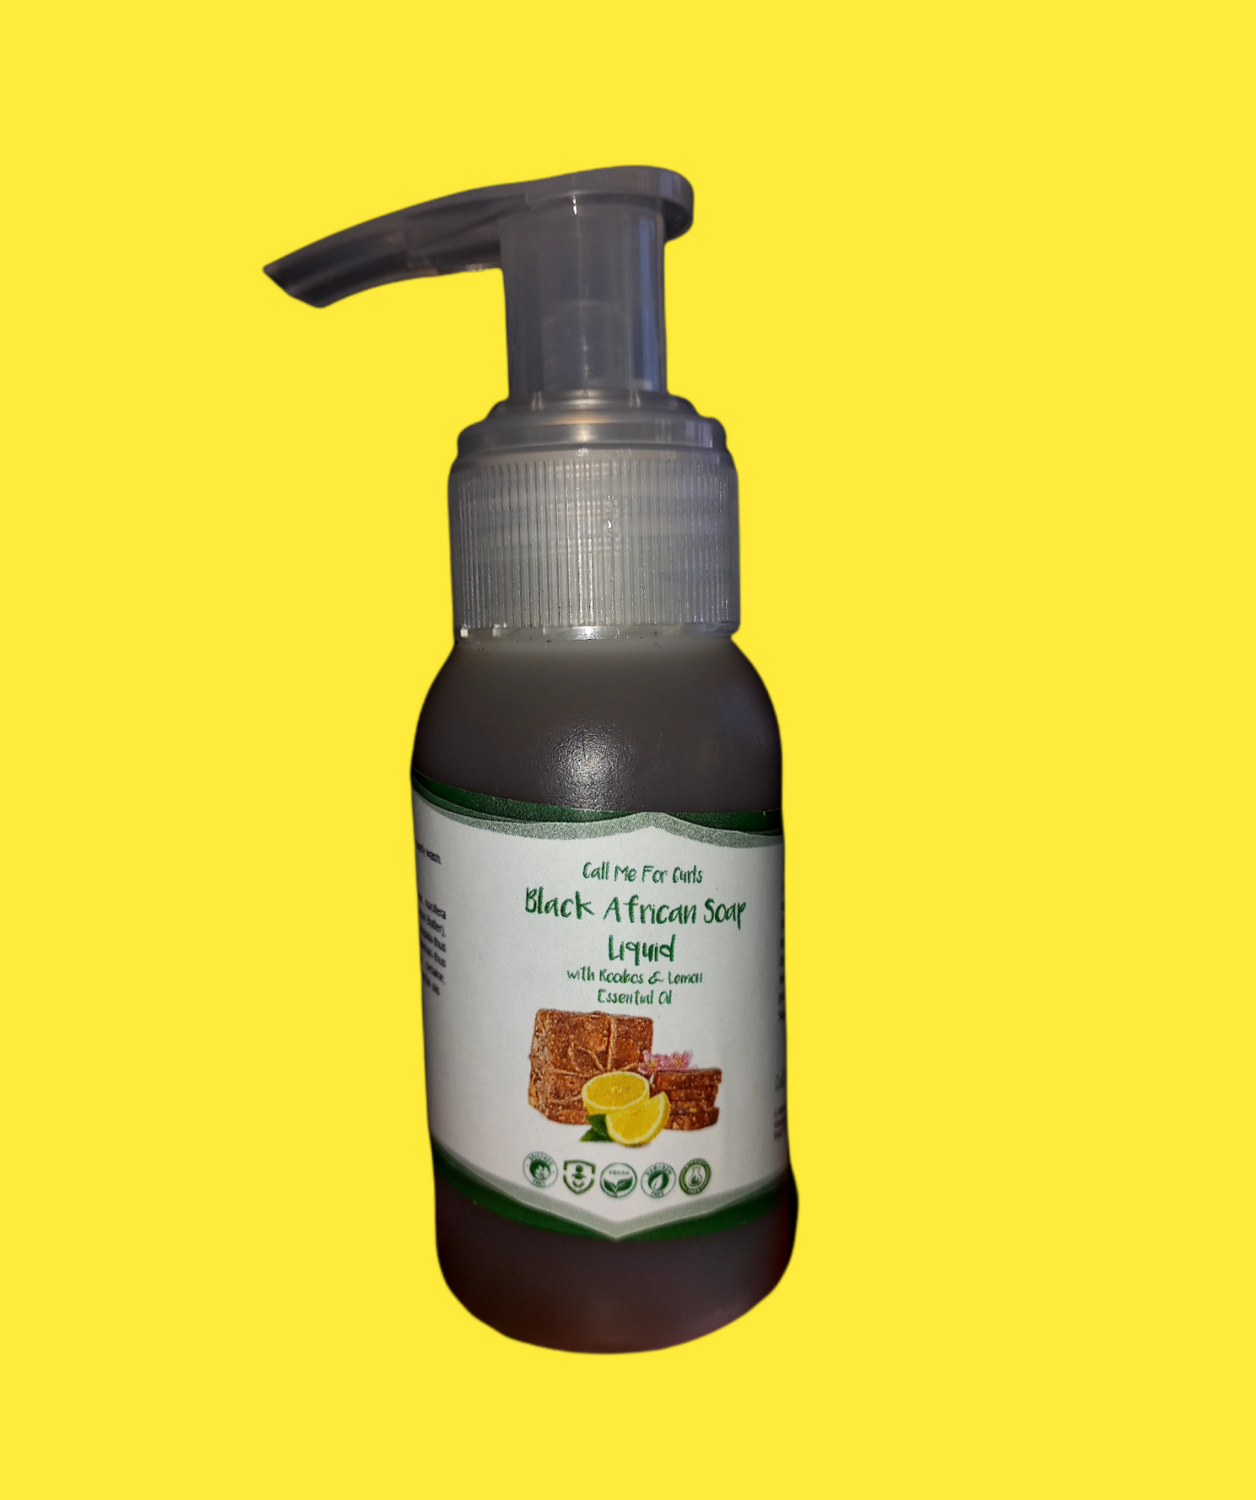 Black African Soap Liquid with Rooibos and Lemon Oil 50ml